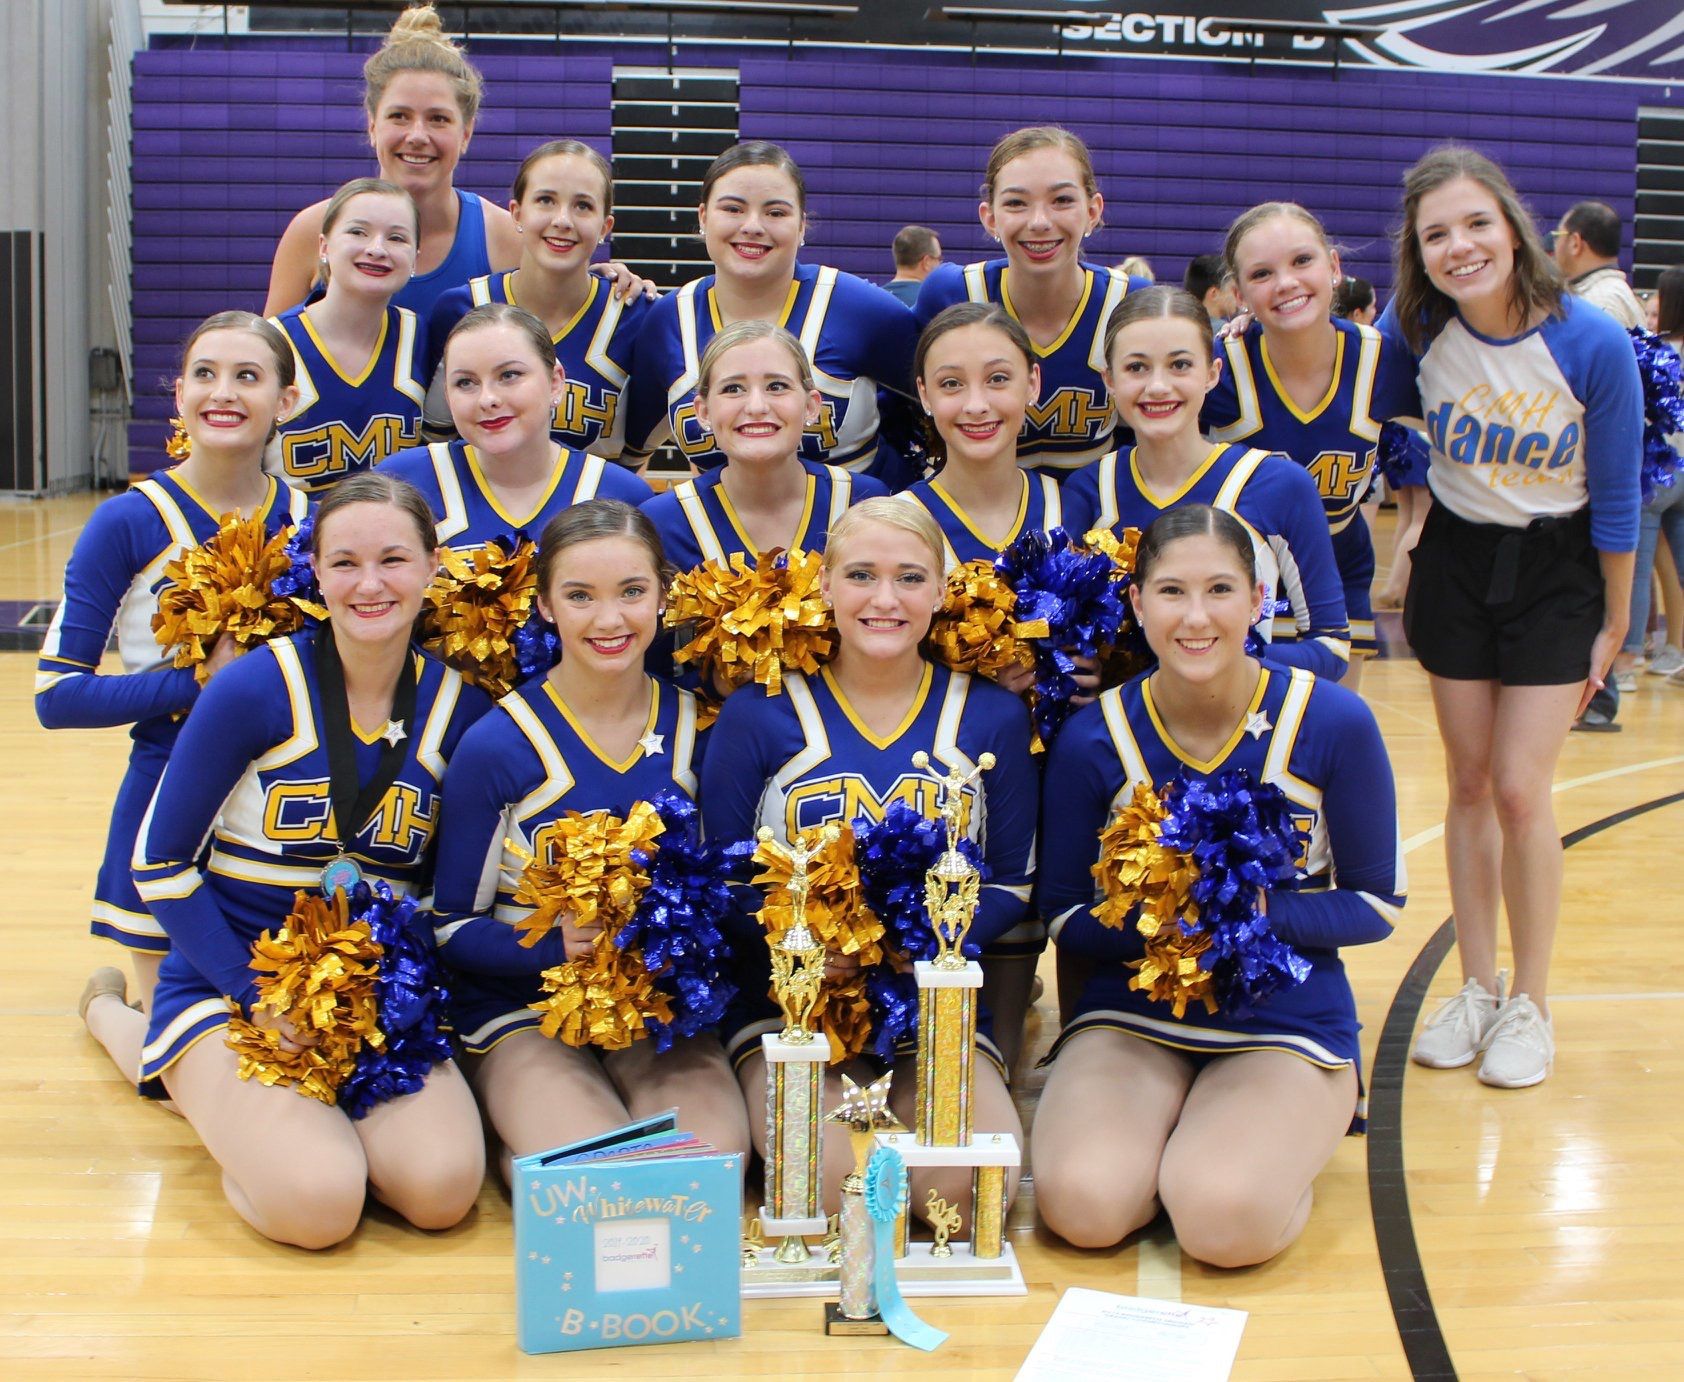 Junior Crusader Poms team poses with trophy